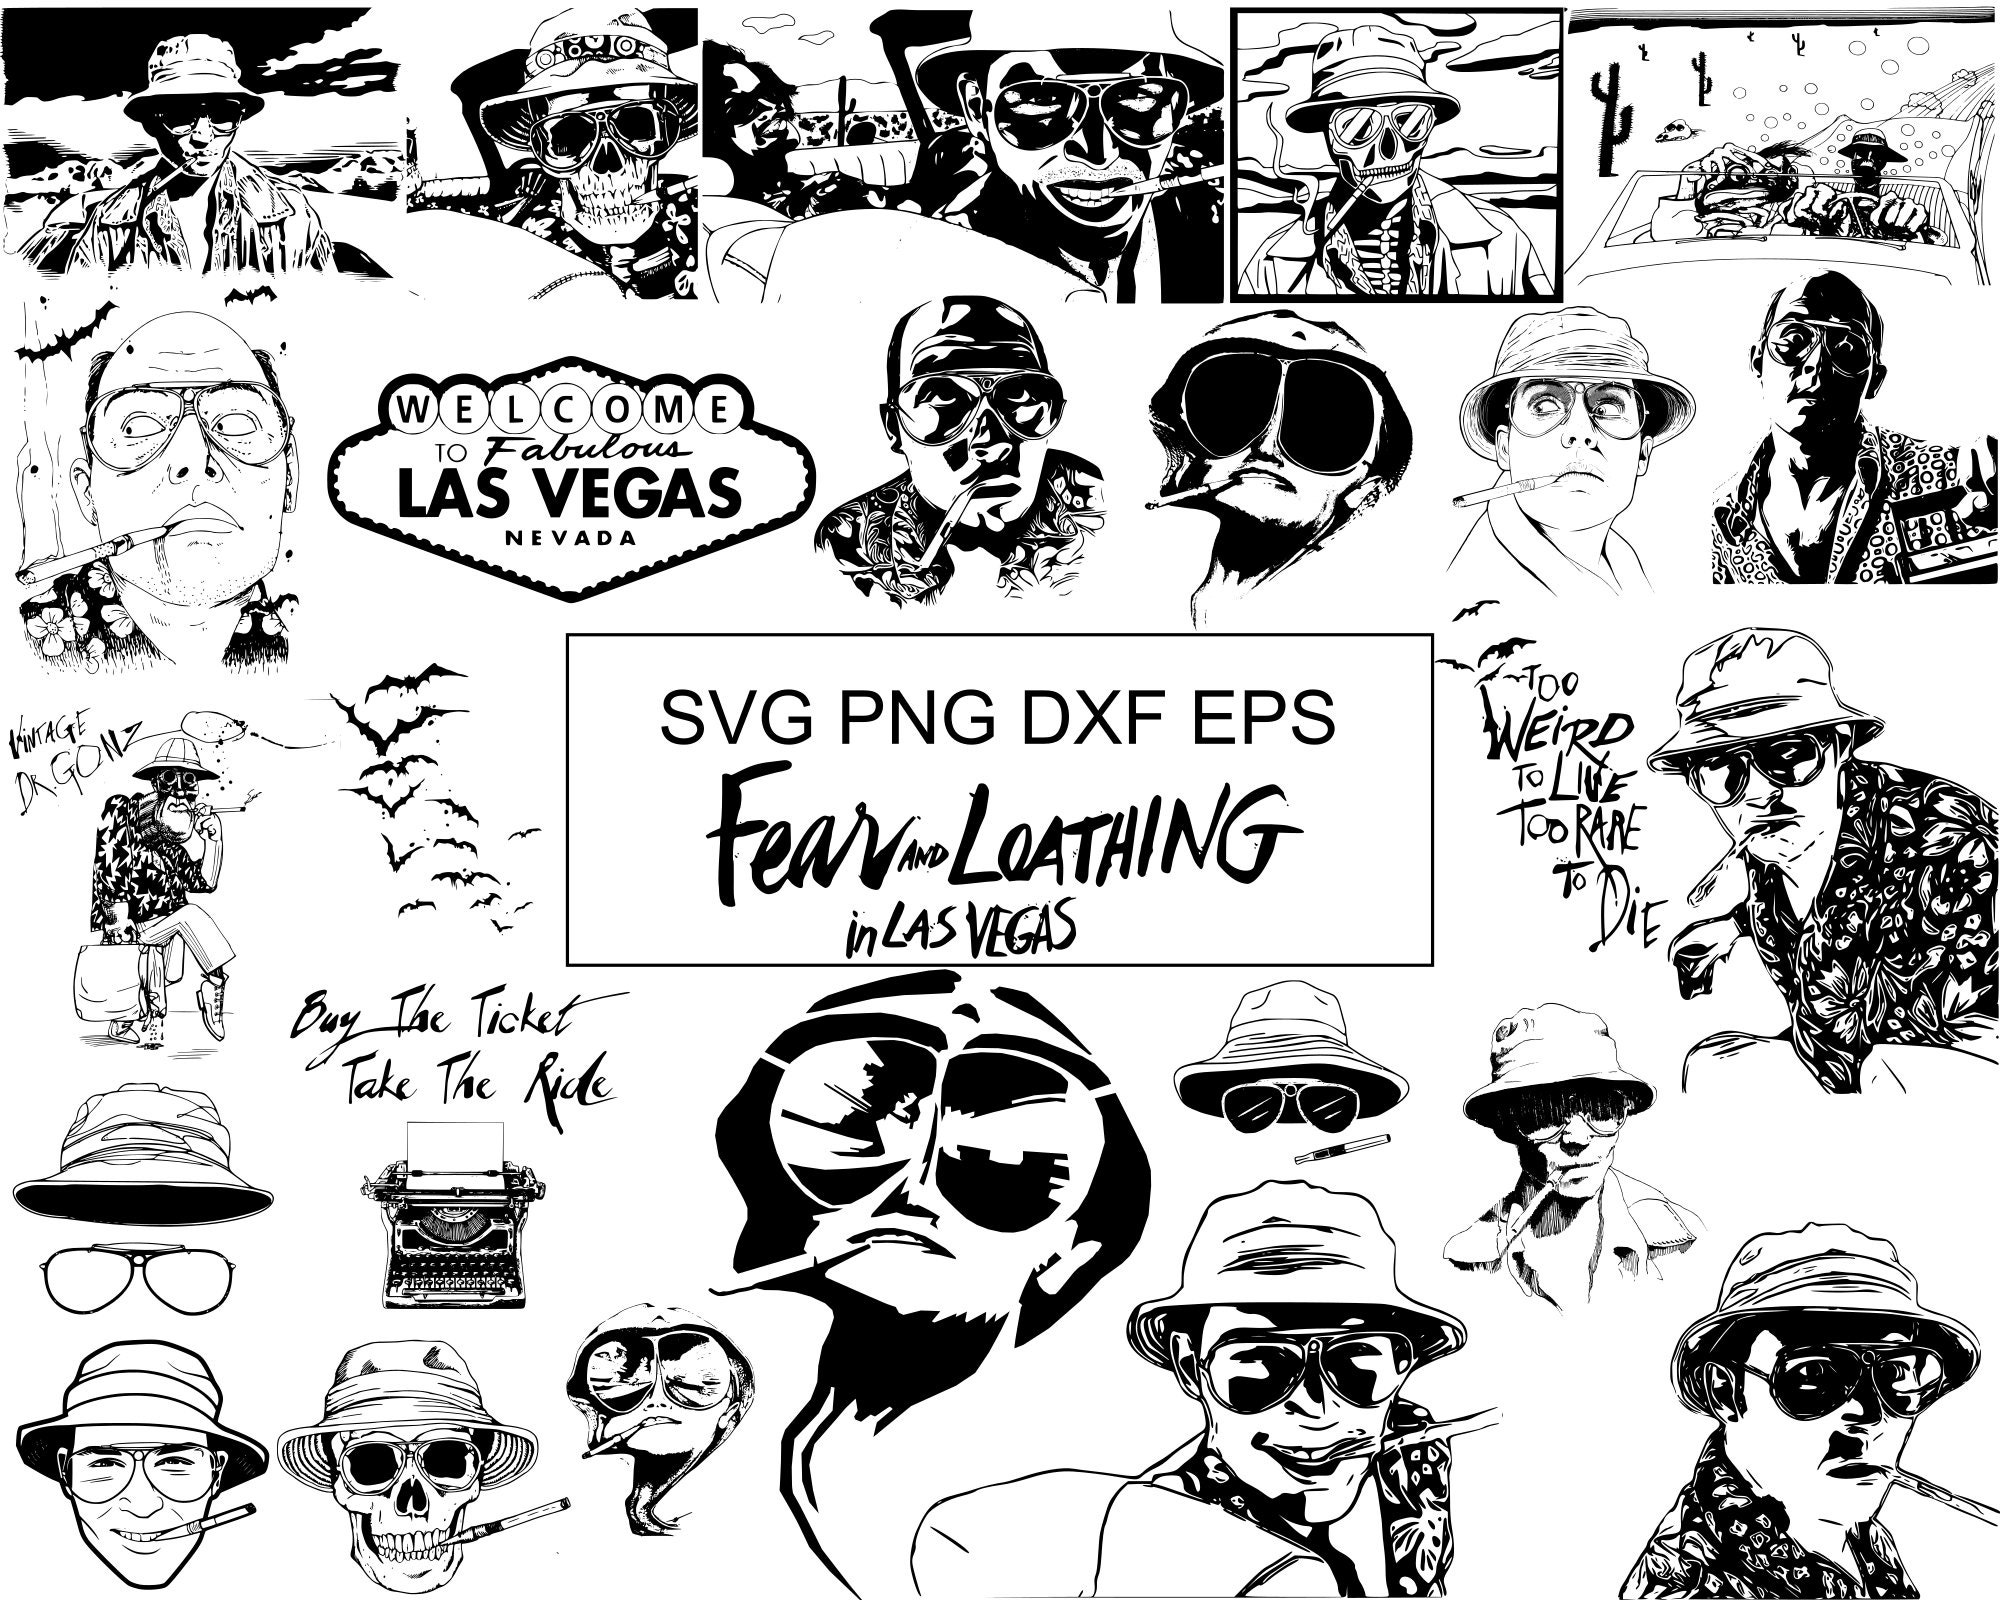 Disney Classical Comedy Adventure Fear And Loathing In Las Vegas Movie  Poster Print Graffiti Canvas Painting Wall Art Room Decor - AliExpress